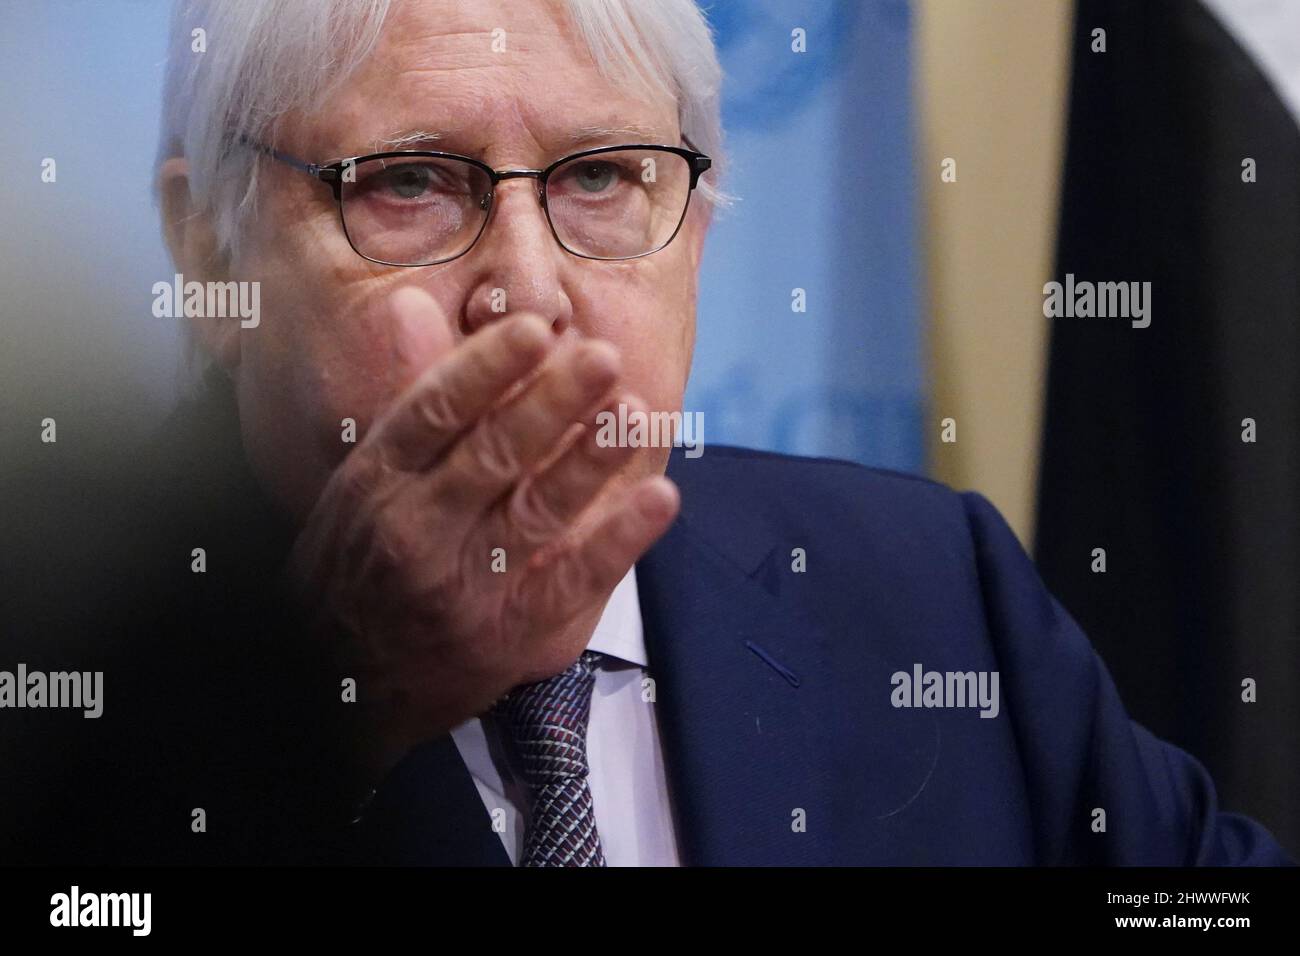 United Nations Under-Secretary-General for Humanitarian Affairs and Emergency Relief Coordinator Martin Griffiths makes declarations to the media after a meeting of the United Nations Security Council on Threats to International Peace and Security, following Russia's invasion of Ukraine, in New York City, U.S., March 7, 2022. REUTERS/Carlo Allegri Stock Photo